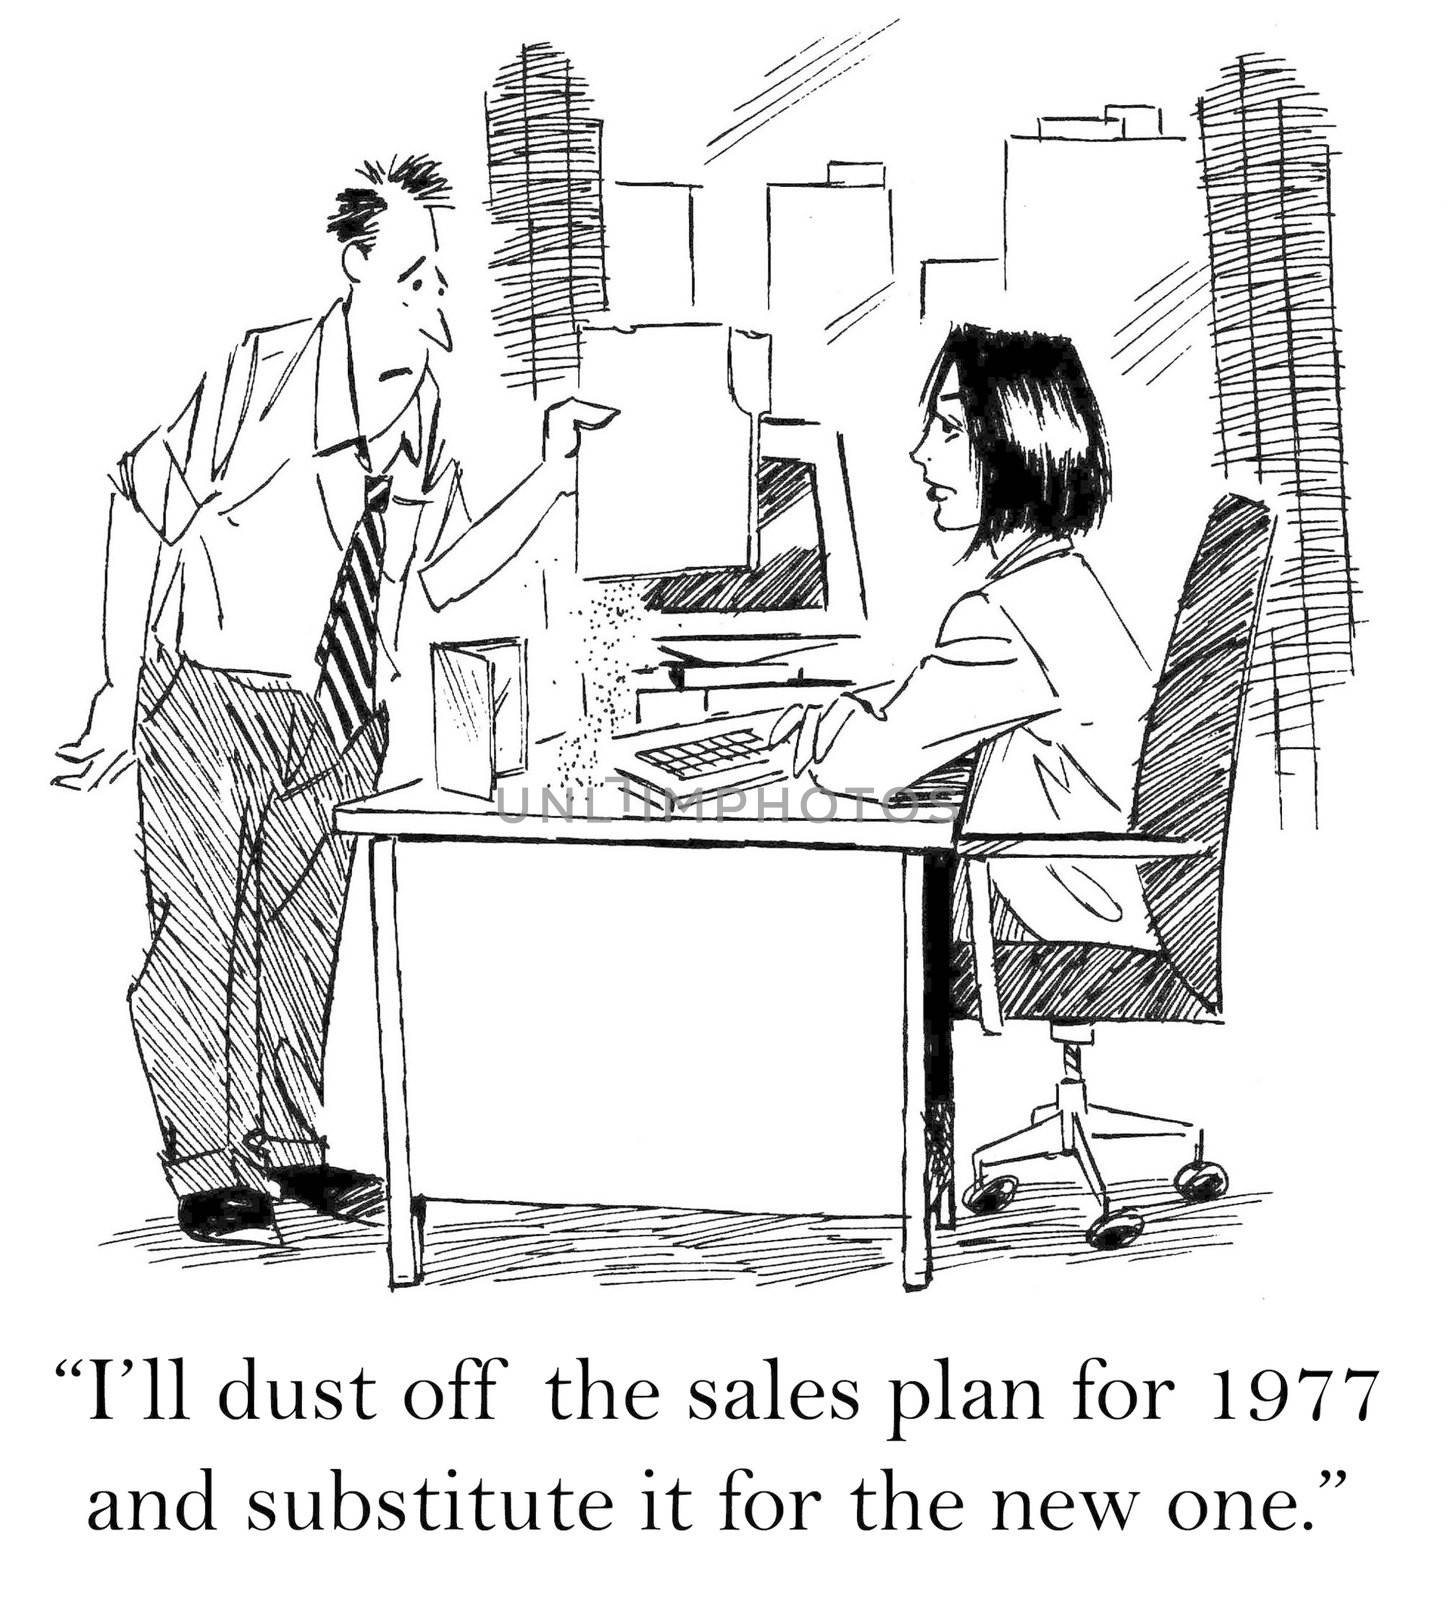 "I'll dust off the sales plan for 1977 and substitute it for the new one."